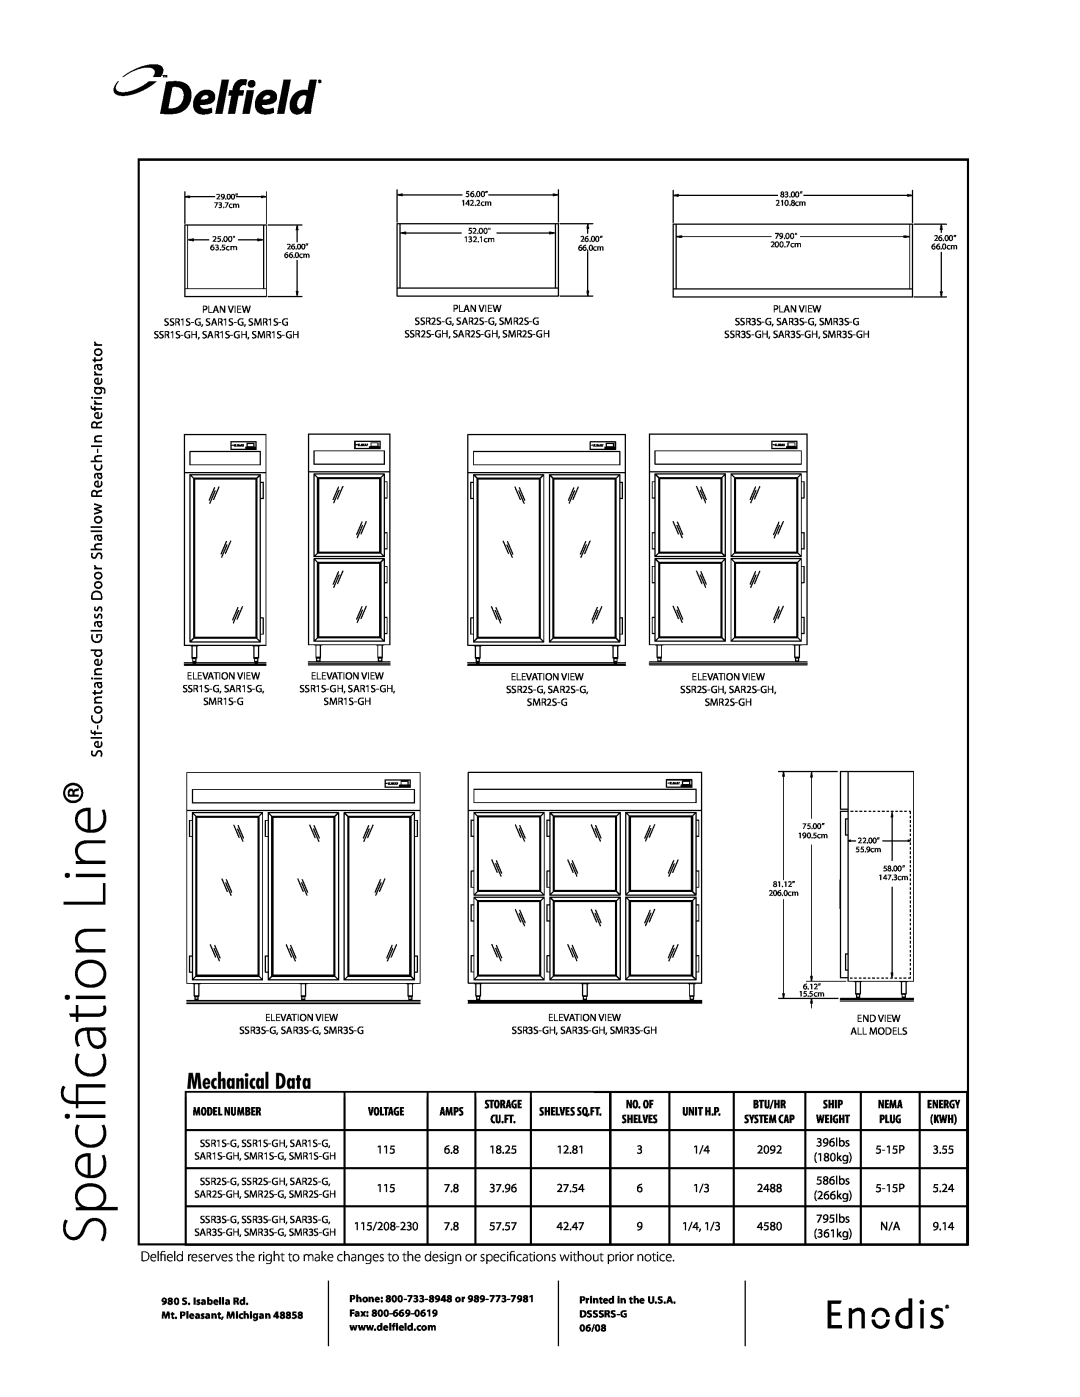 Delfield SSR1S-G Line, Specification, Delfield, Mechanical Data, Glass Door Shallow Reach-InRefrigerator, Self-Contained 